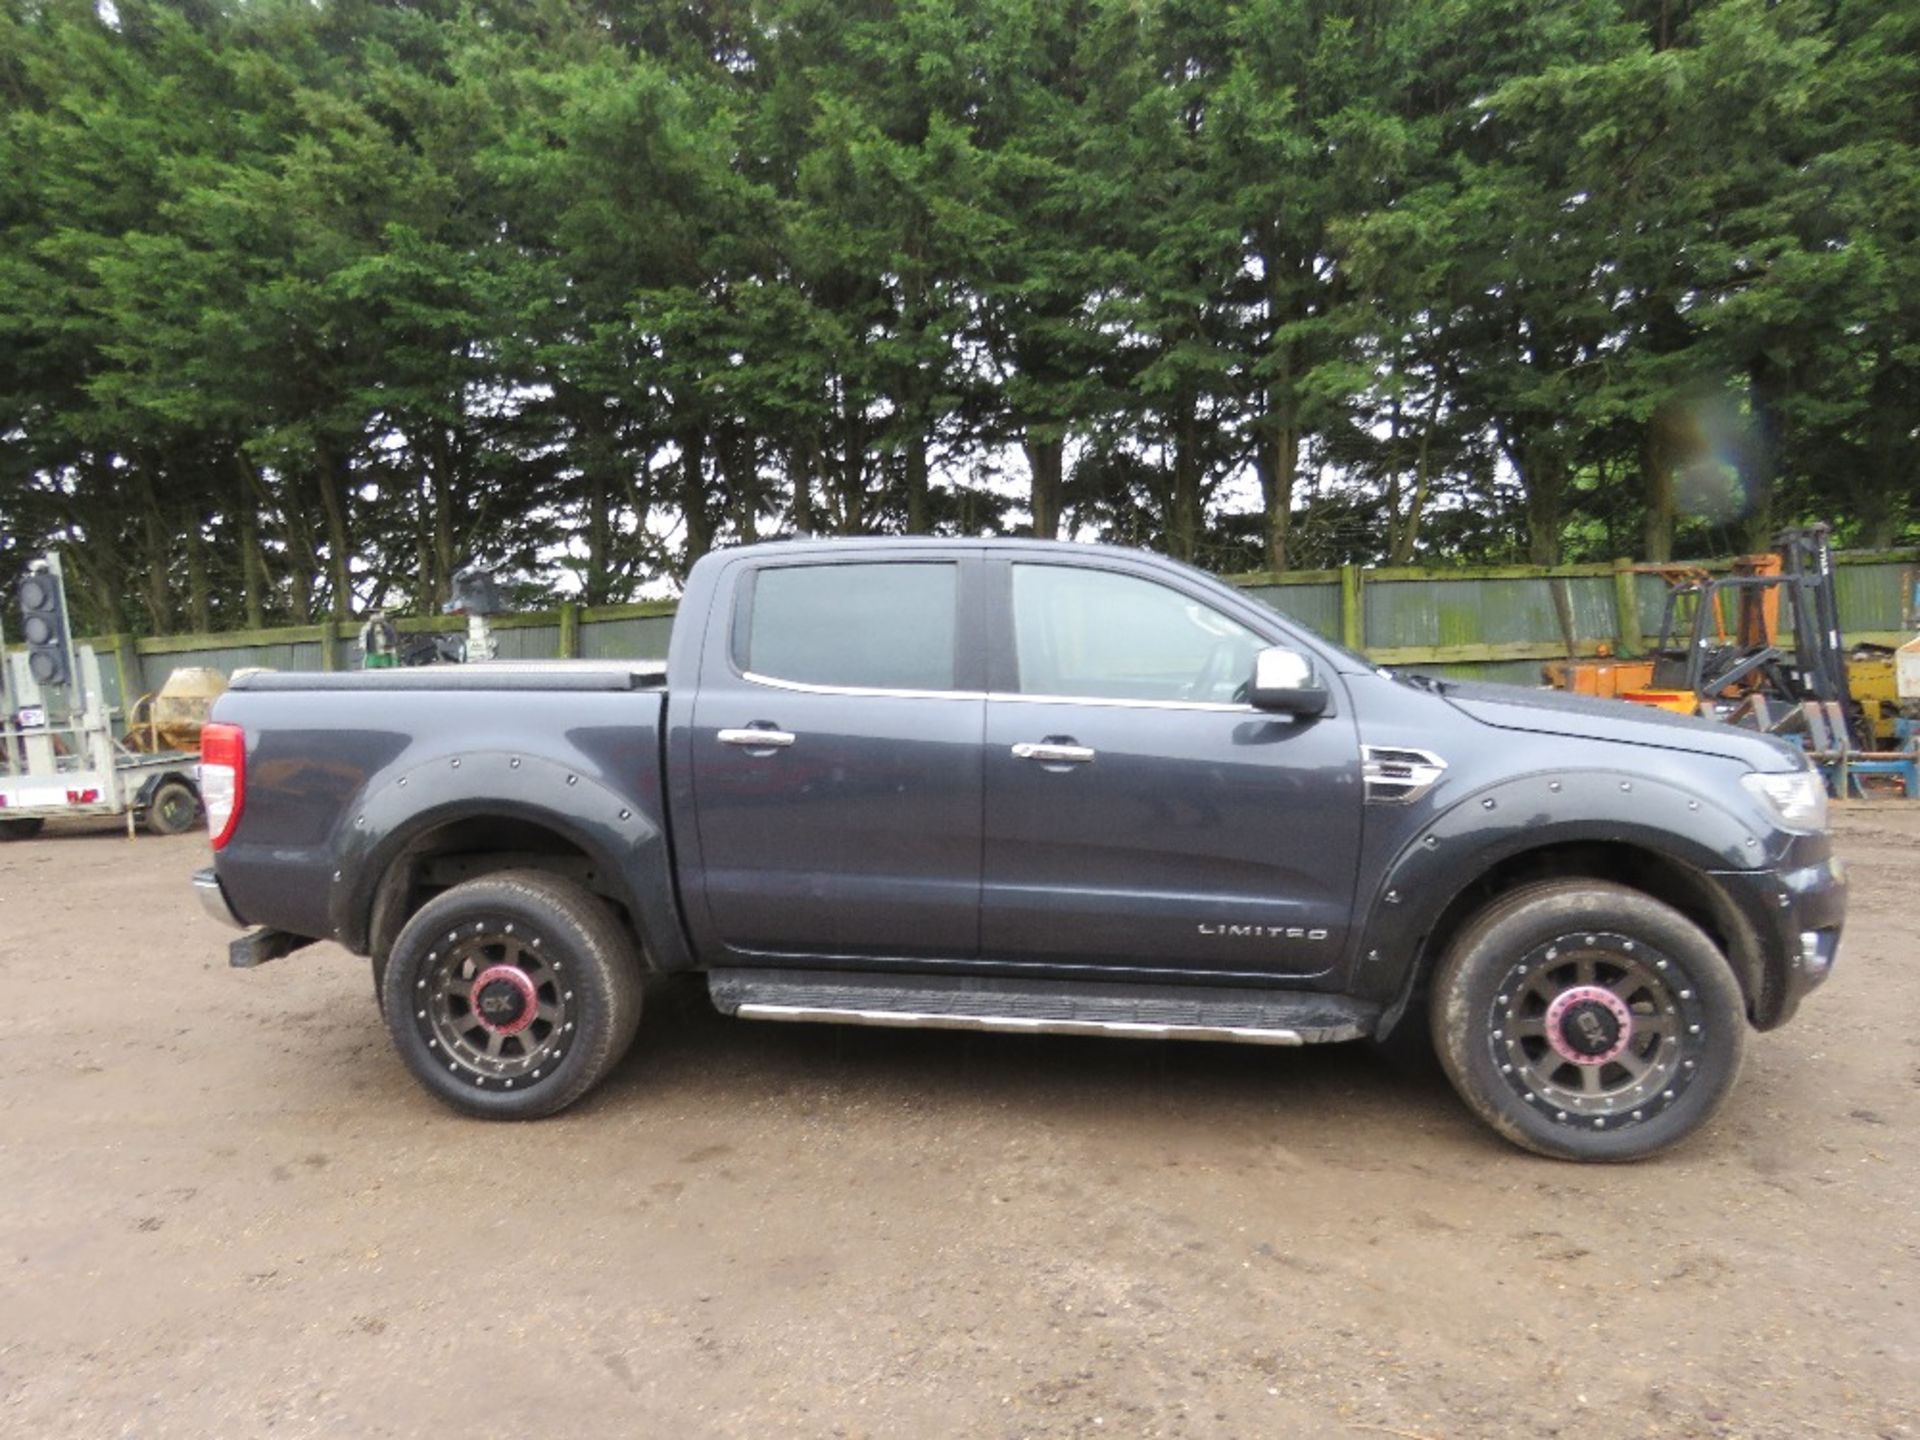 FORD RANGER LIMITED EDITION DOUBLE CAB PICKUP, AUTOMATIC, REG:YR70 LGF. 110,287 REC MILES. 2 LITRE - Image 3 of 15